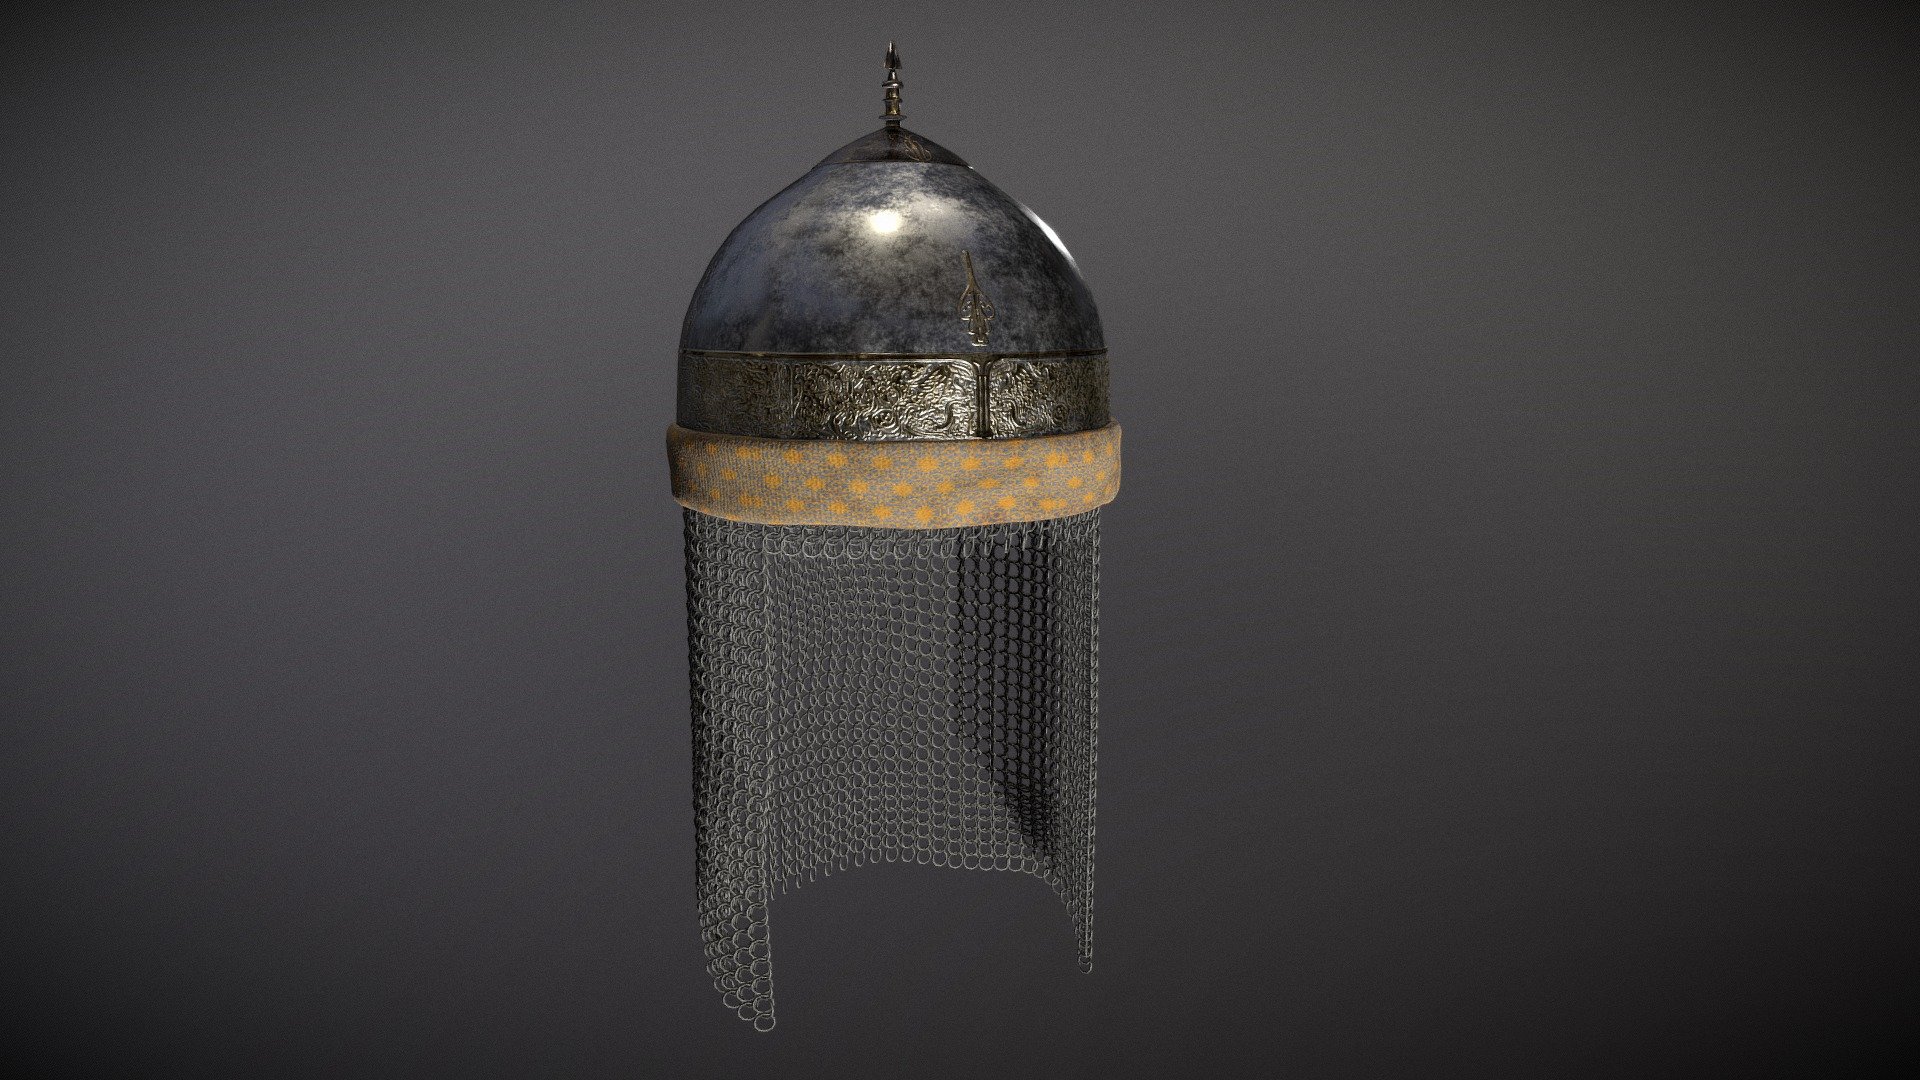 Mughal inspired helmet with gold pattern. mughols were Turkic-Mongol who conquired and rulled india. So this helmet has clear similarity with ottoman helmets worn by sodires. Though this is not a 3d recreation of a preserved helmet, i followed many references to design this helmet 3d model